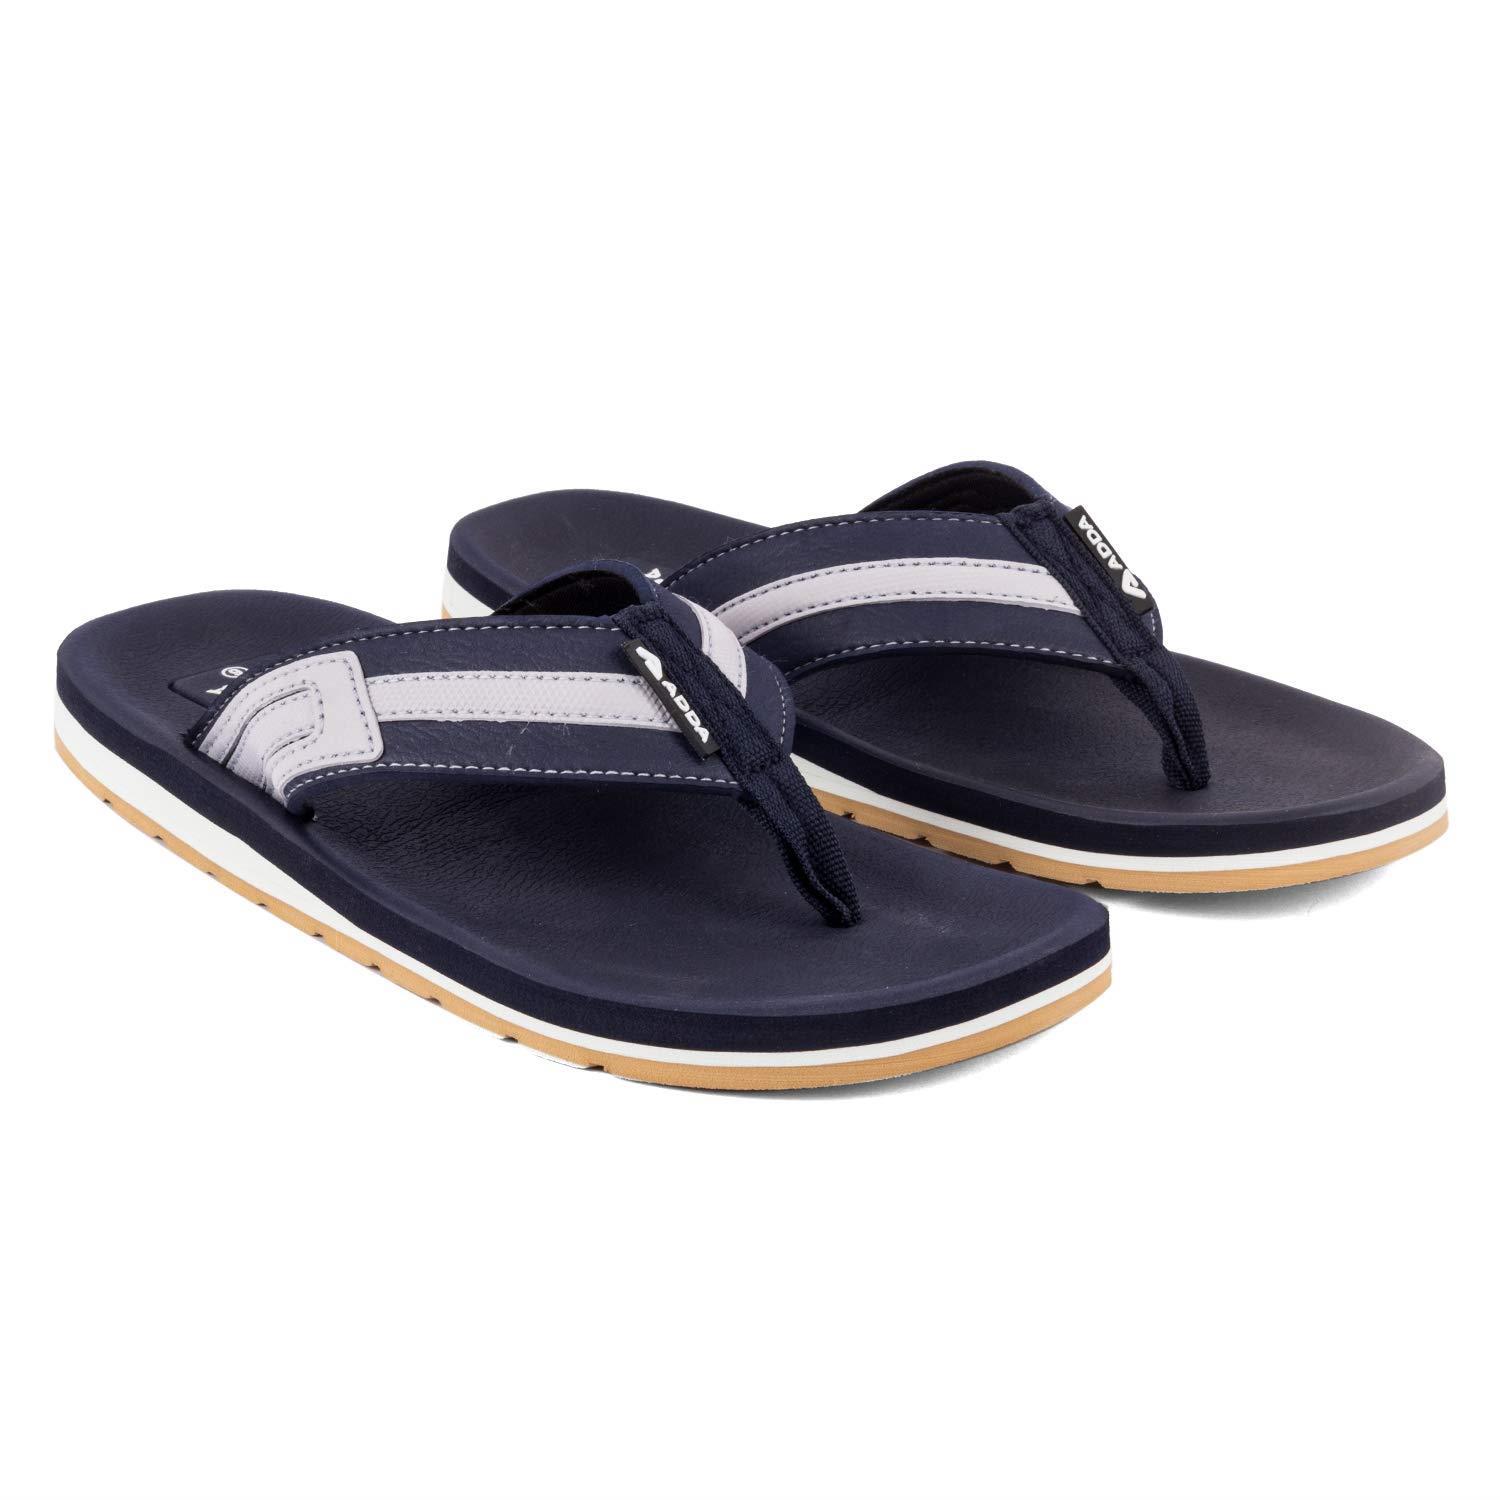 Adda Slippers for Men Comfortable to Wear Lite | Shopee Philippines-happymobile.vn